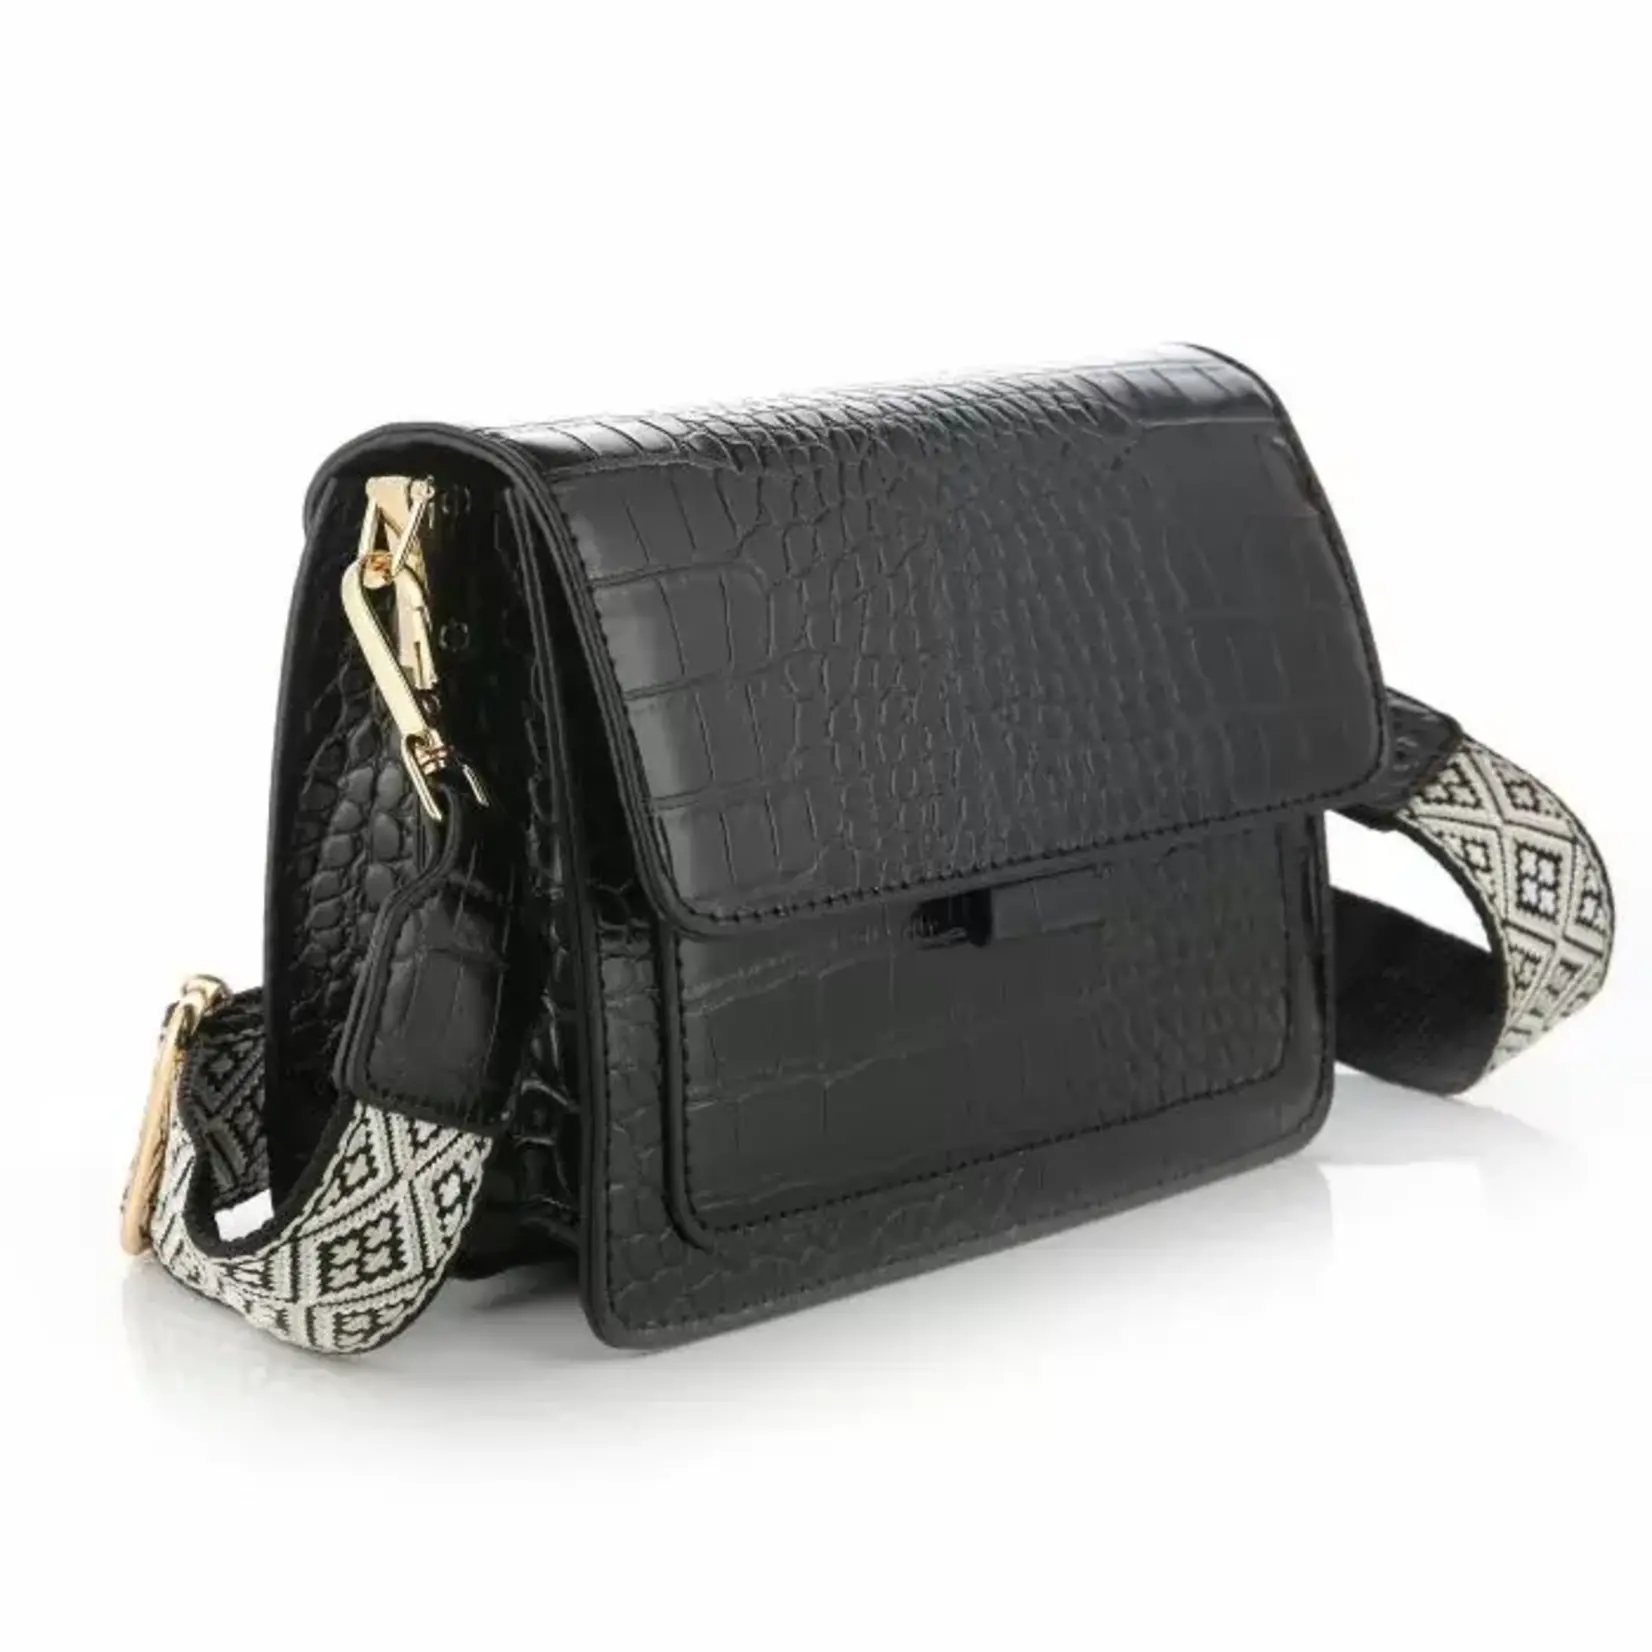 More the Firm Tas croco luxe band black